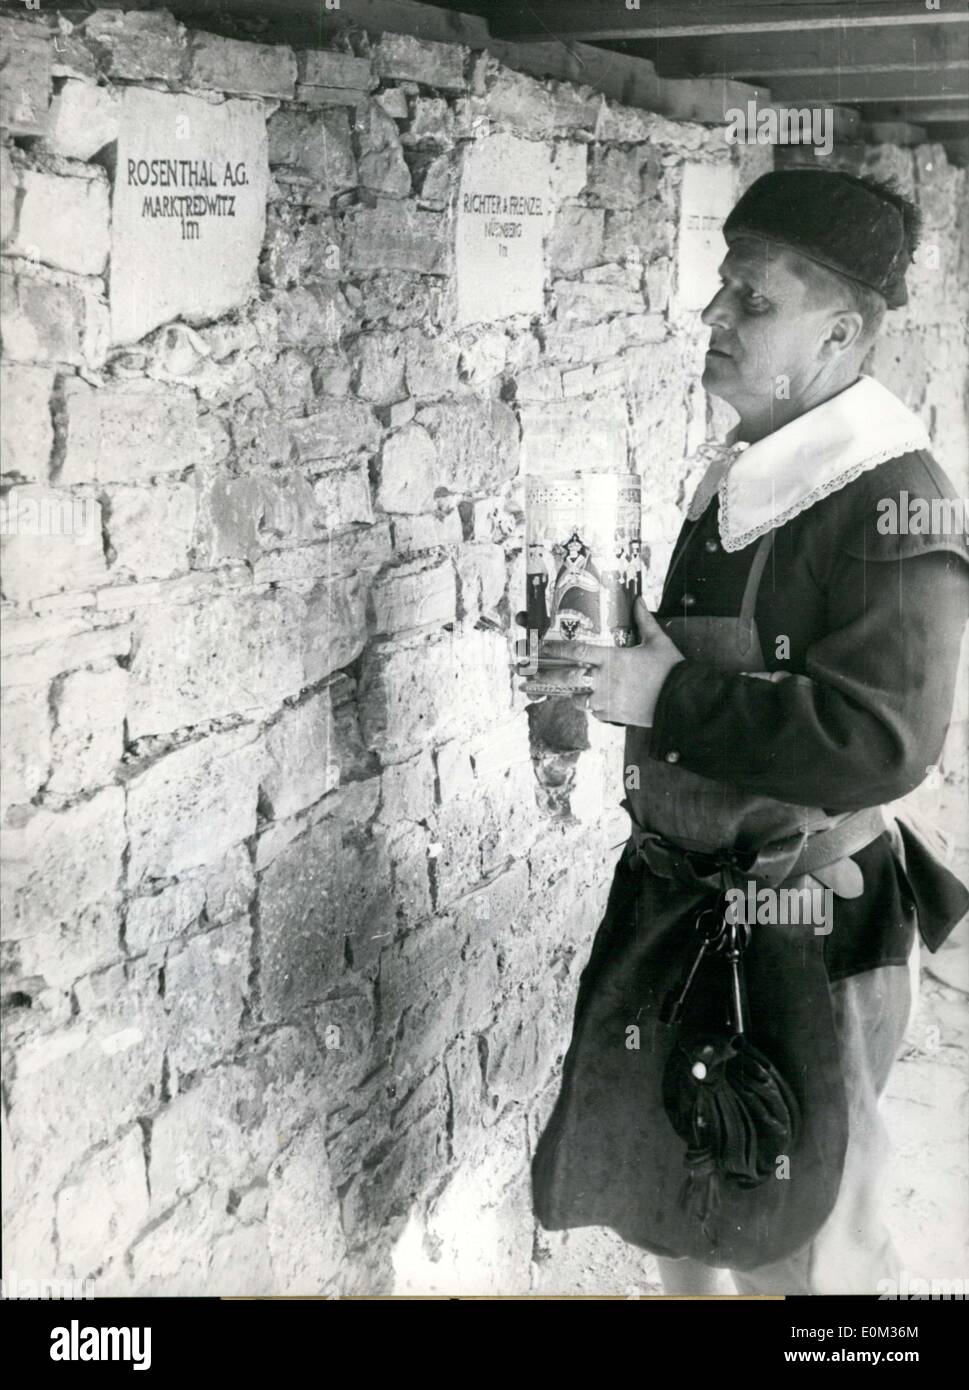 Apr. 23, 1953 - The names of donors that helped fund the reconstruction of the Rothenburg city wall are etched in places along the wall. 750 meters of the wall were destroyed during the Brandenburg bombings during the war. They paid 59DM to get their name on the wall. Stock Photo